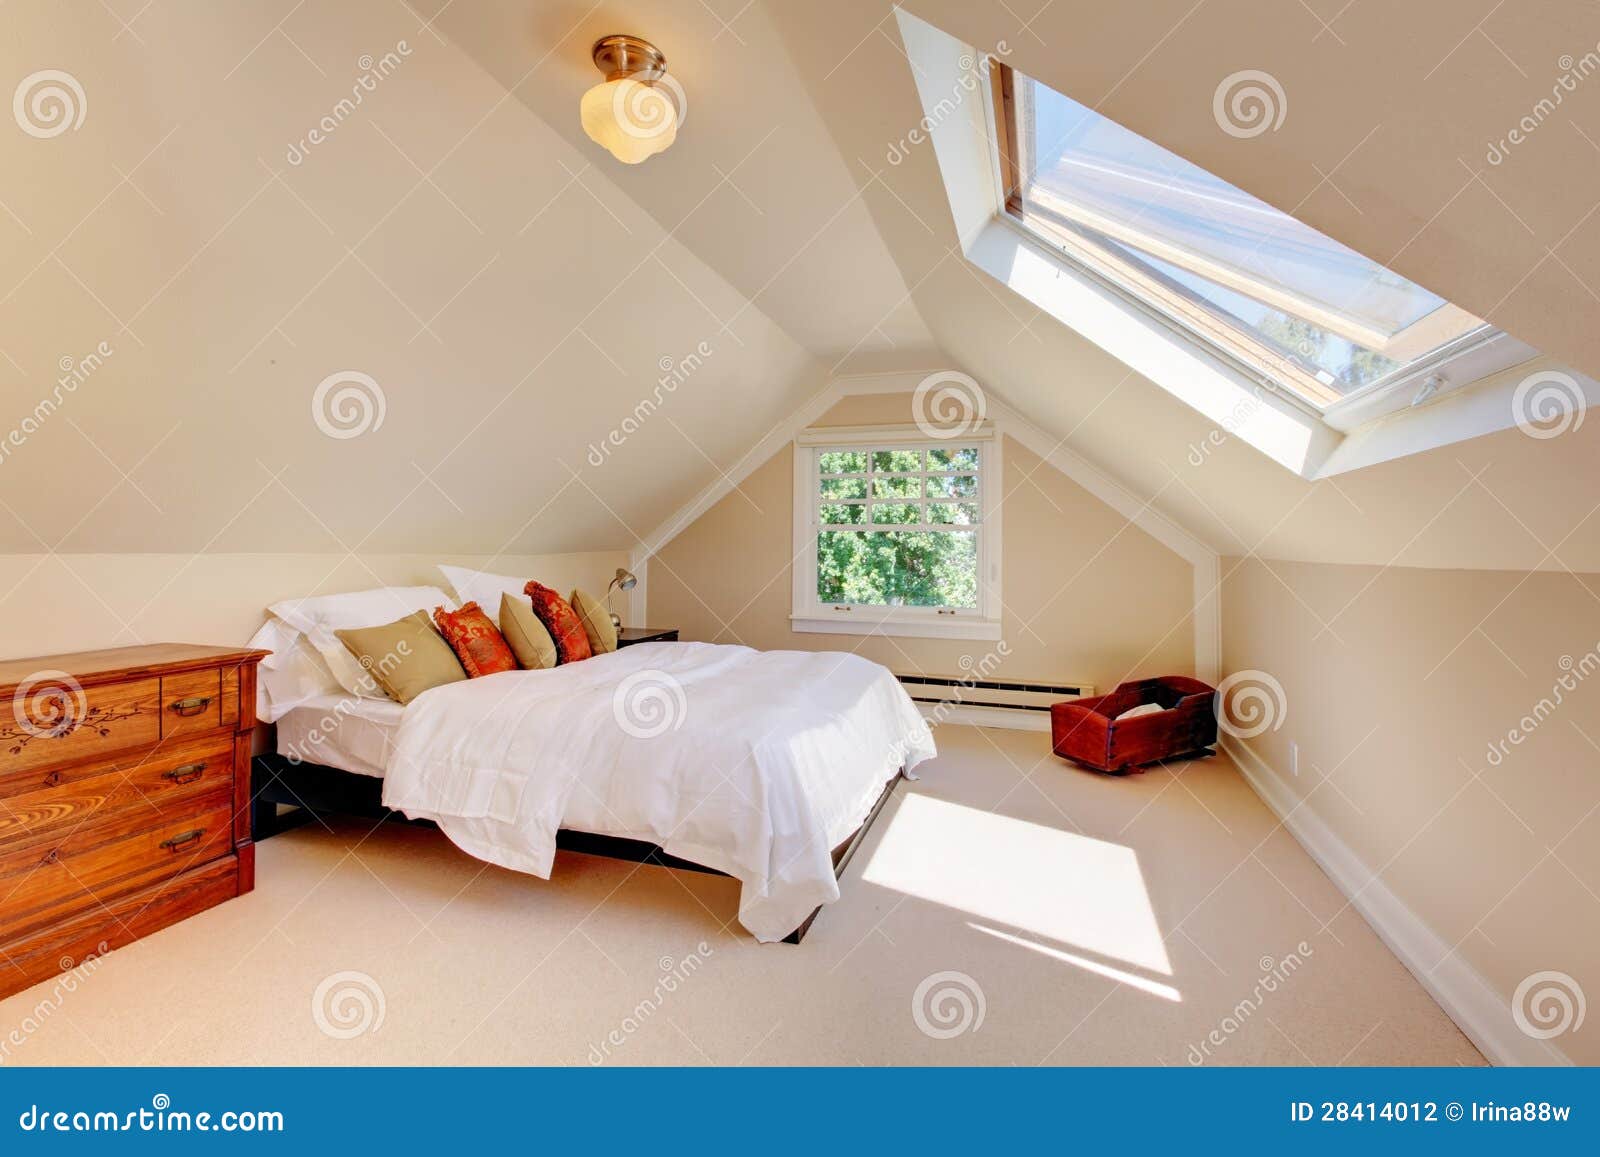 attic modern bedroom with white bed and skylight.